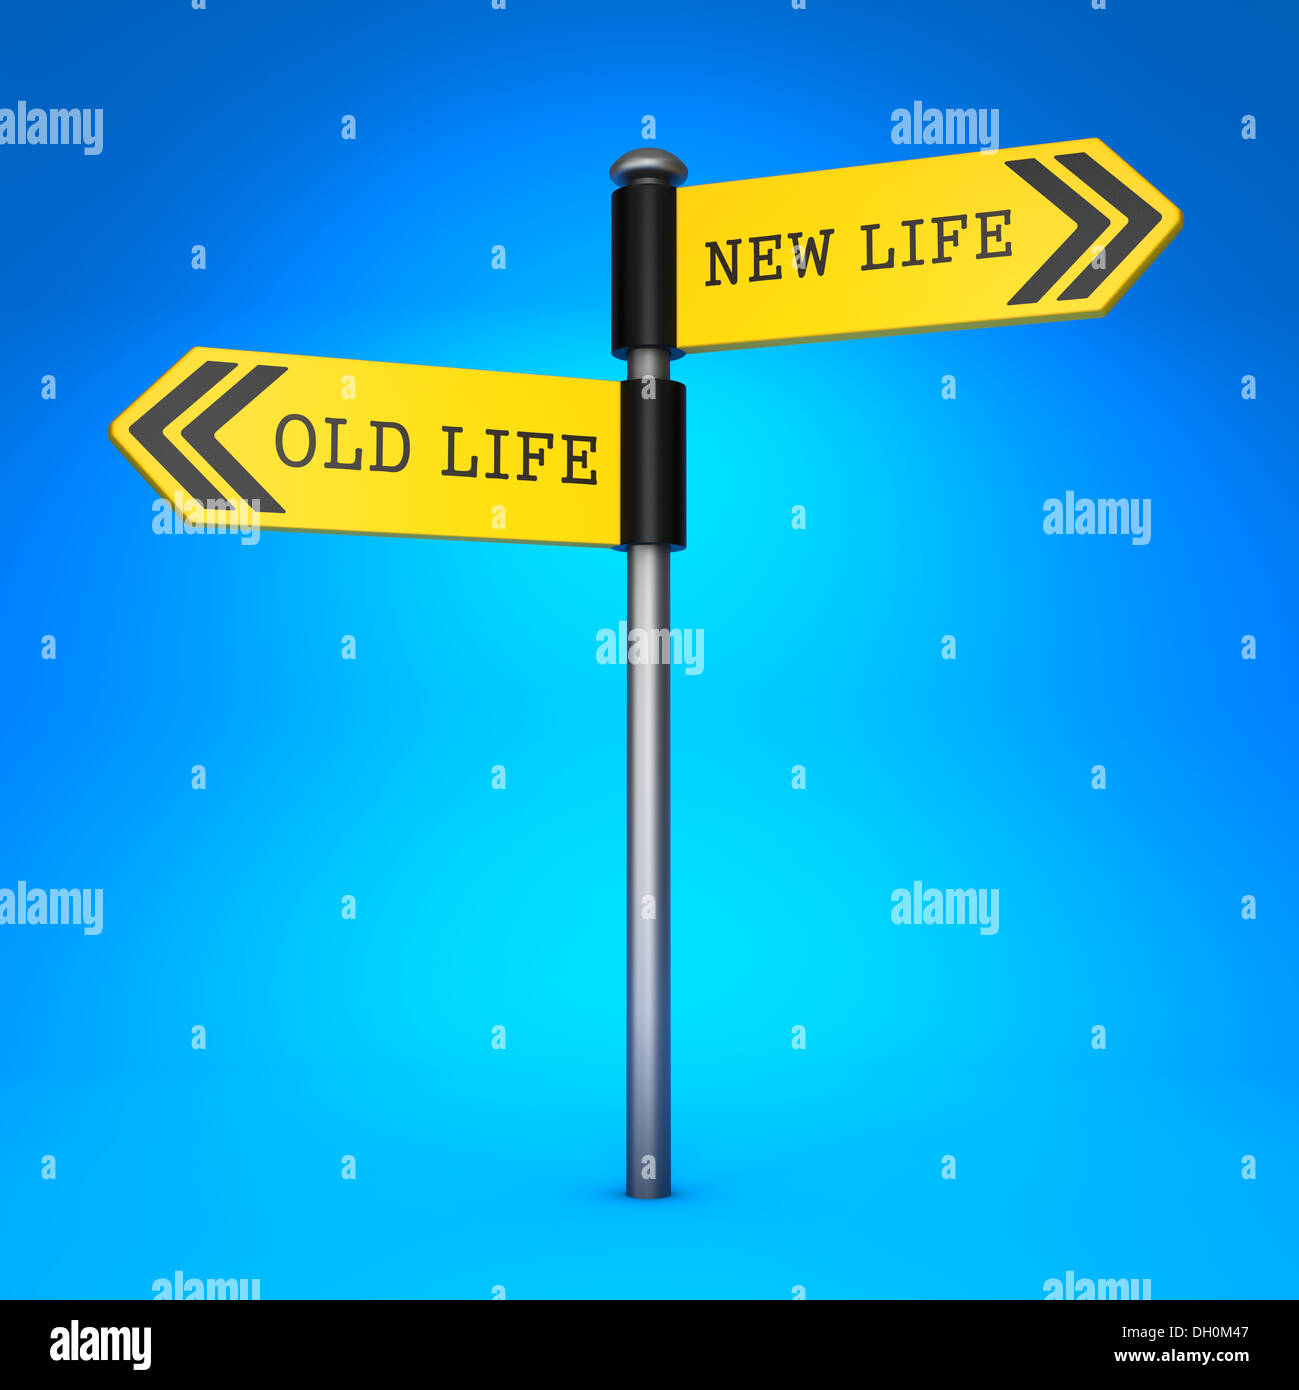 Old Life or New Life. Concept of Choice. Stock Photo